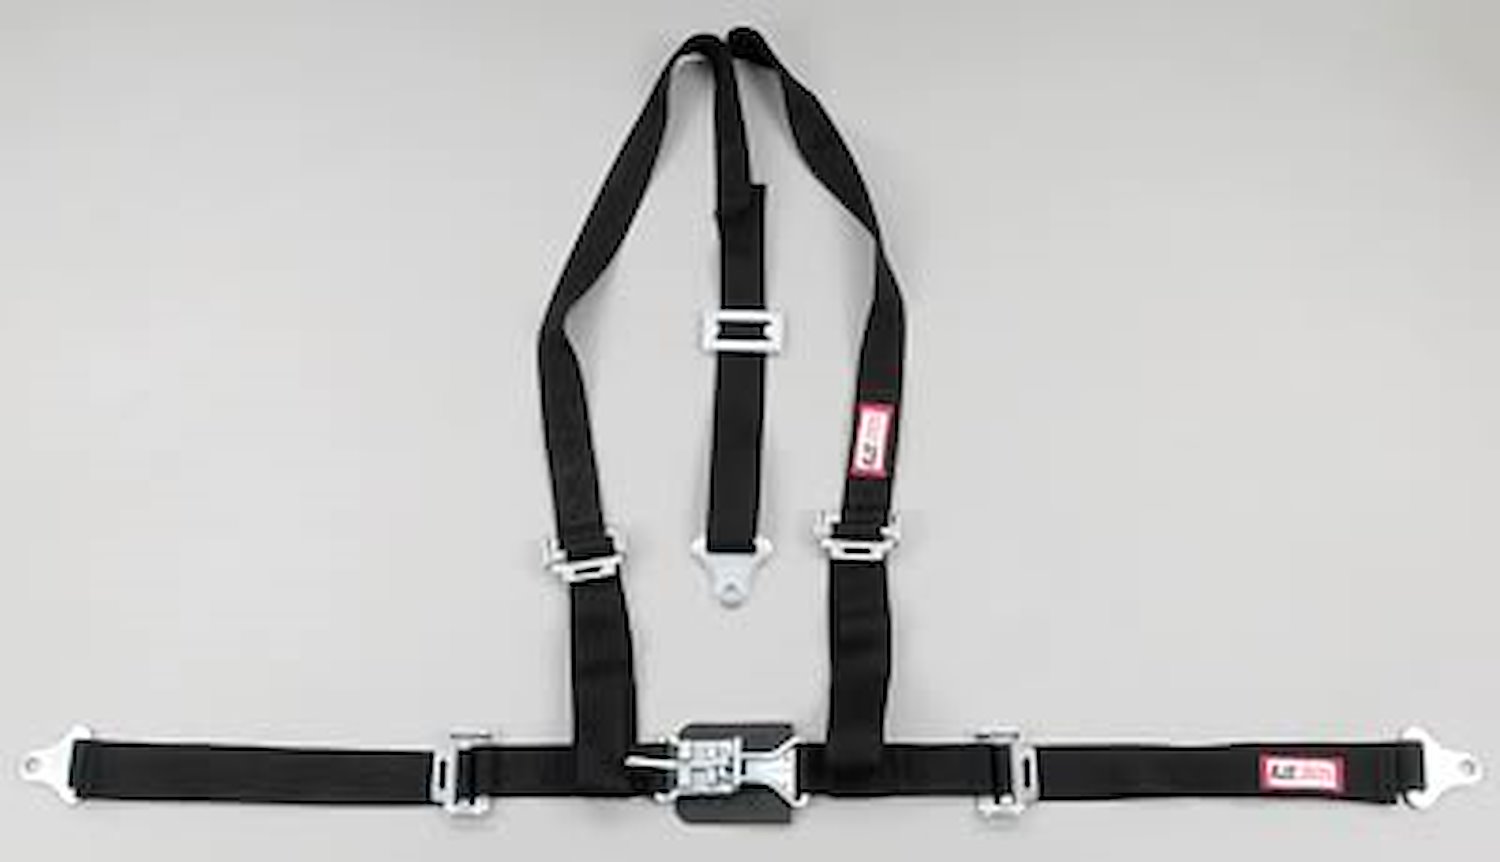 NON-SFI L&L HARNESS 3 PULL DOWN Lap Belt w/adjuster SNAP 2 S.H. Individual ROLL BAR Mount WRAP/SNAP RED